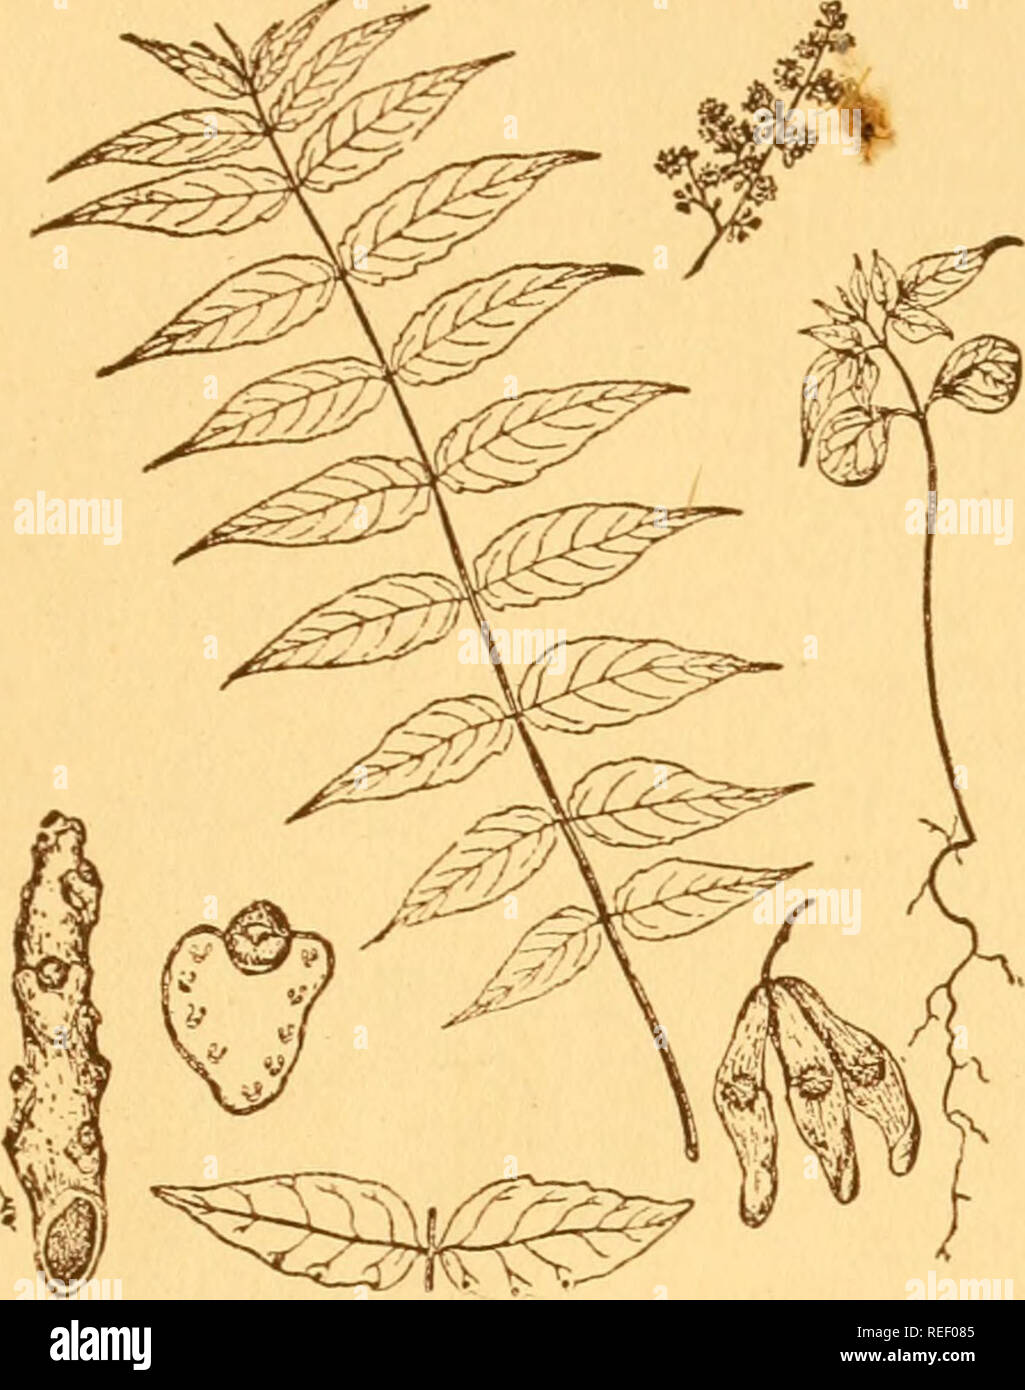 . Common trees of Ohio : a handy pocket manual of the common and introduced trees of Ohio. Trees -- Ohio. OF Ohio 83 AILANTHUS Ailanthus glandulosa, Desfontaines THE Ailanthus. also called Tree of Heaven, Chinese Sumac, and Paradise Tree came to this country from China about 150 years ago, and was planted first near Phila- delphia. The leaves are alternate compound, with 11 to 31 leaflets, occasionally 3 feet long. Leaflets are 3 to 5 inches. AILANTHUS One-fourth natural size. Twig, one-half natural size. Leaf-scar, slightly enlarged. long, egg-shaped, long-pointed at apex, smooth along mar- g Stock Photo